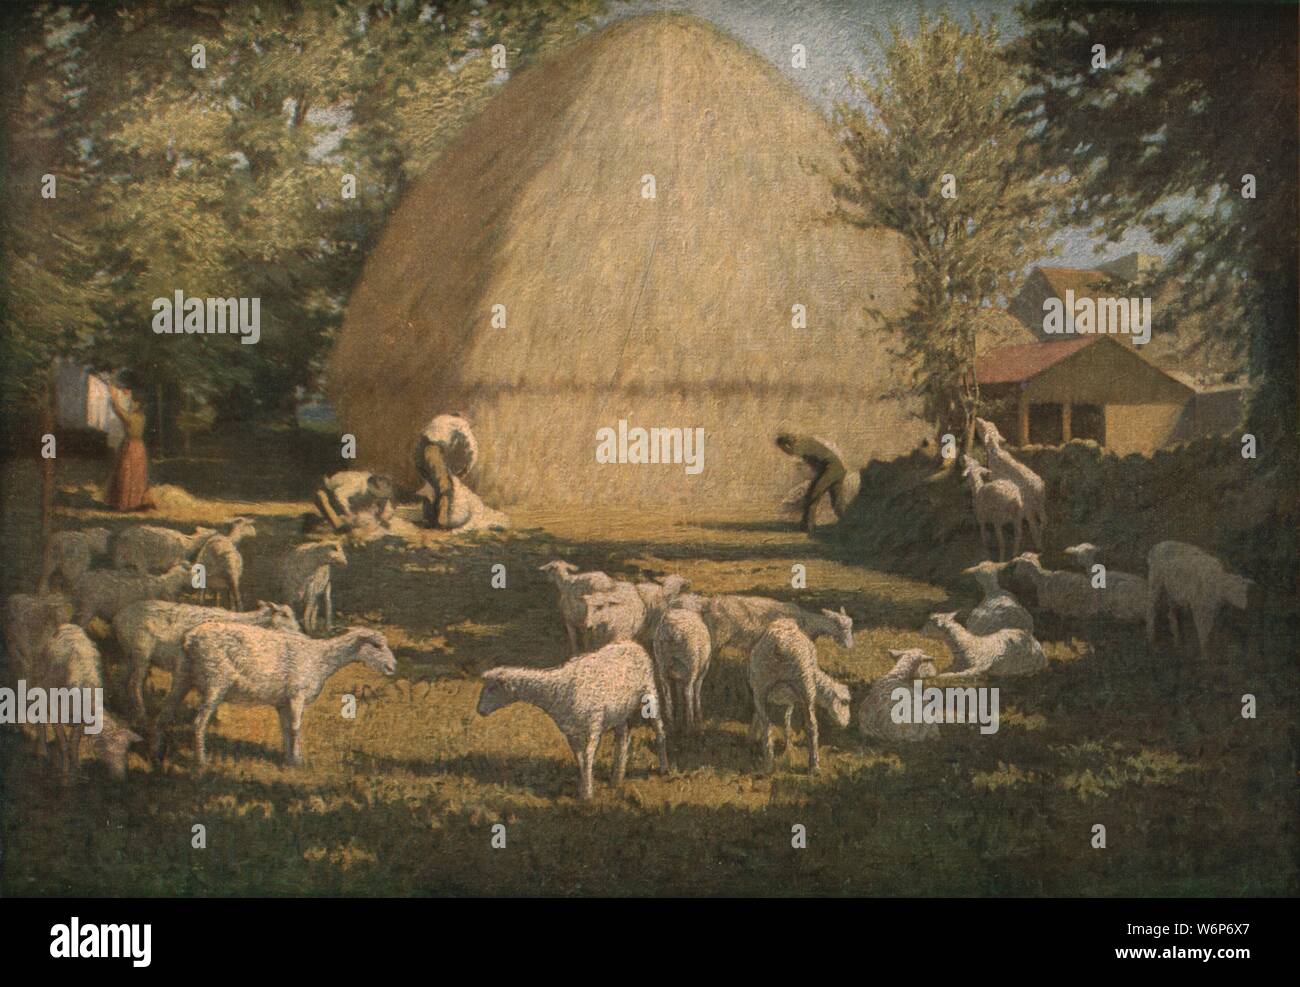 'Sheep Shearing', 1901, (c1930). Farm workers shearing sheep in front of a large haystack, with a woman hanging clothes out to dry. Painting in the Dublin City Gallery, The Hugh Lane, Dublin. From &quot;Modern Masterpieces of British Art&quot;. [The Amalgamated Press Ltd., London, c1930] Stock Photo